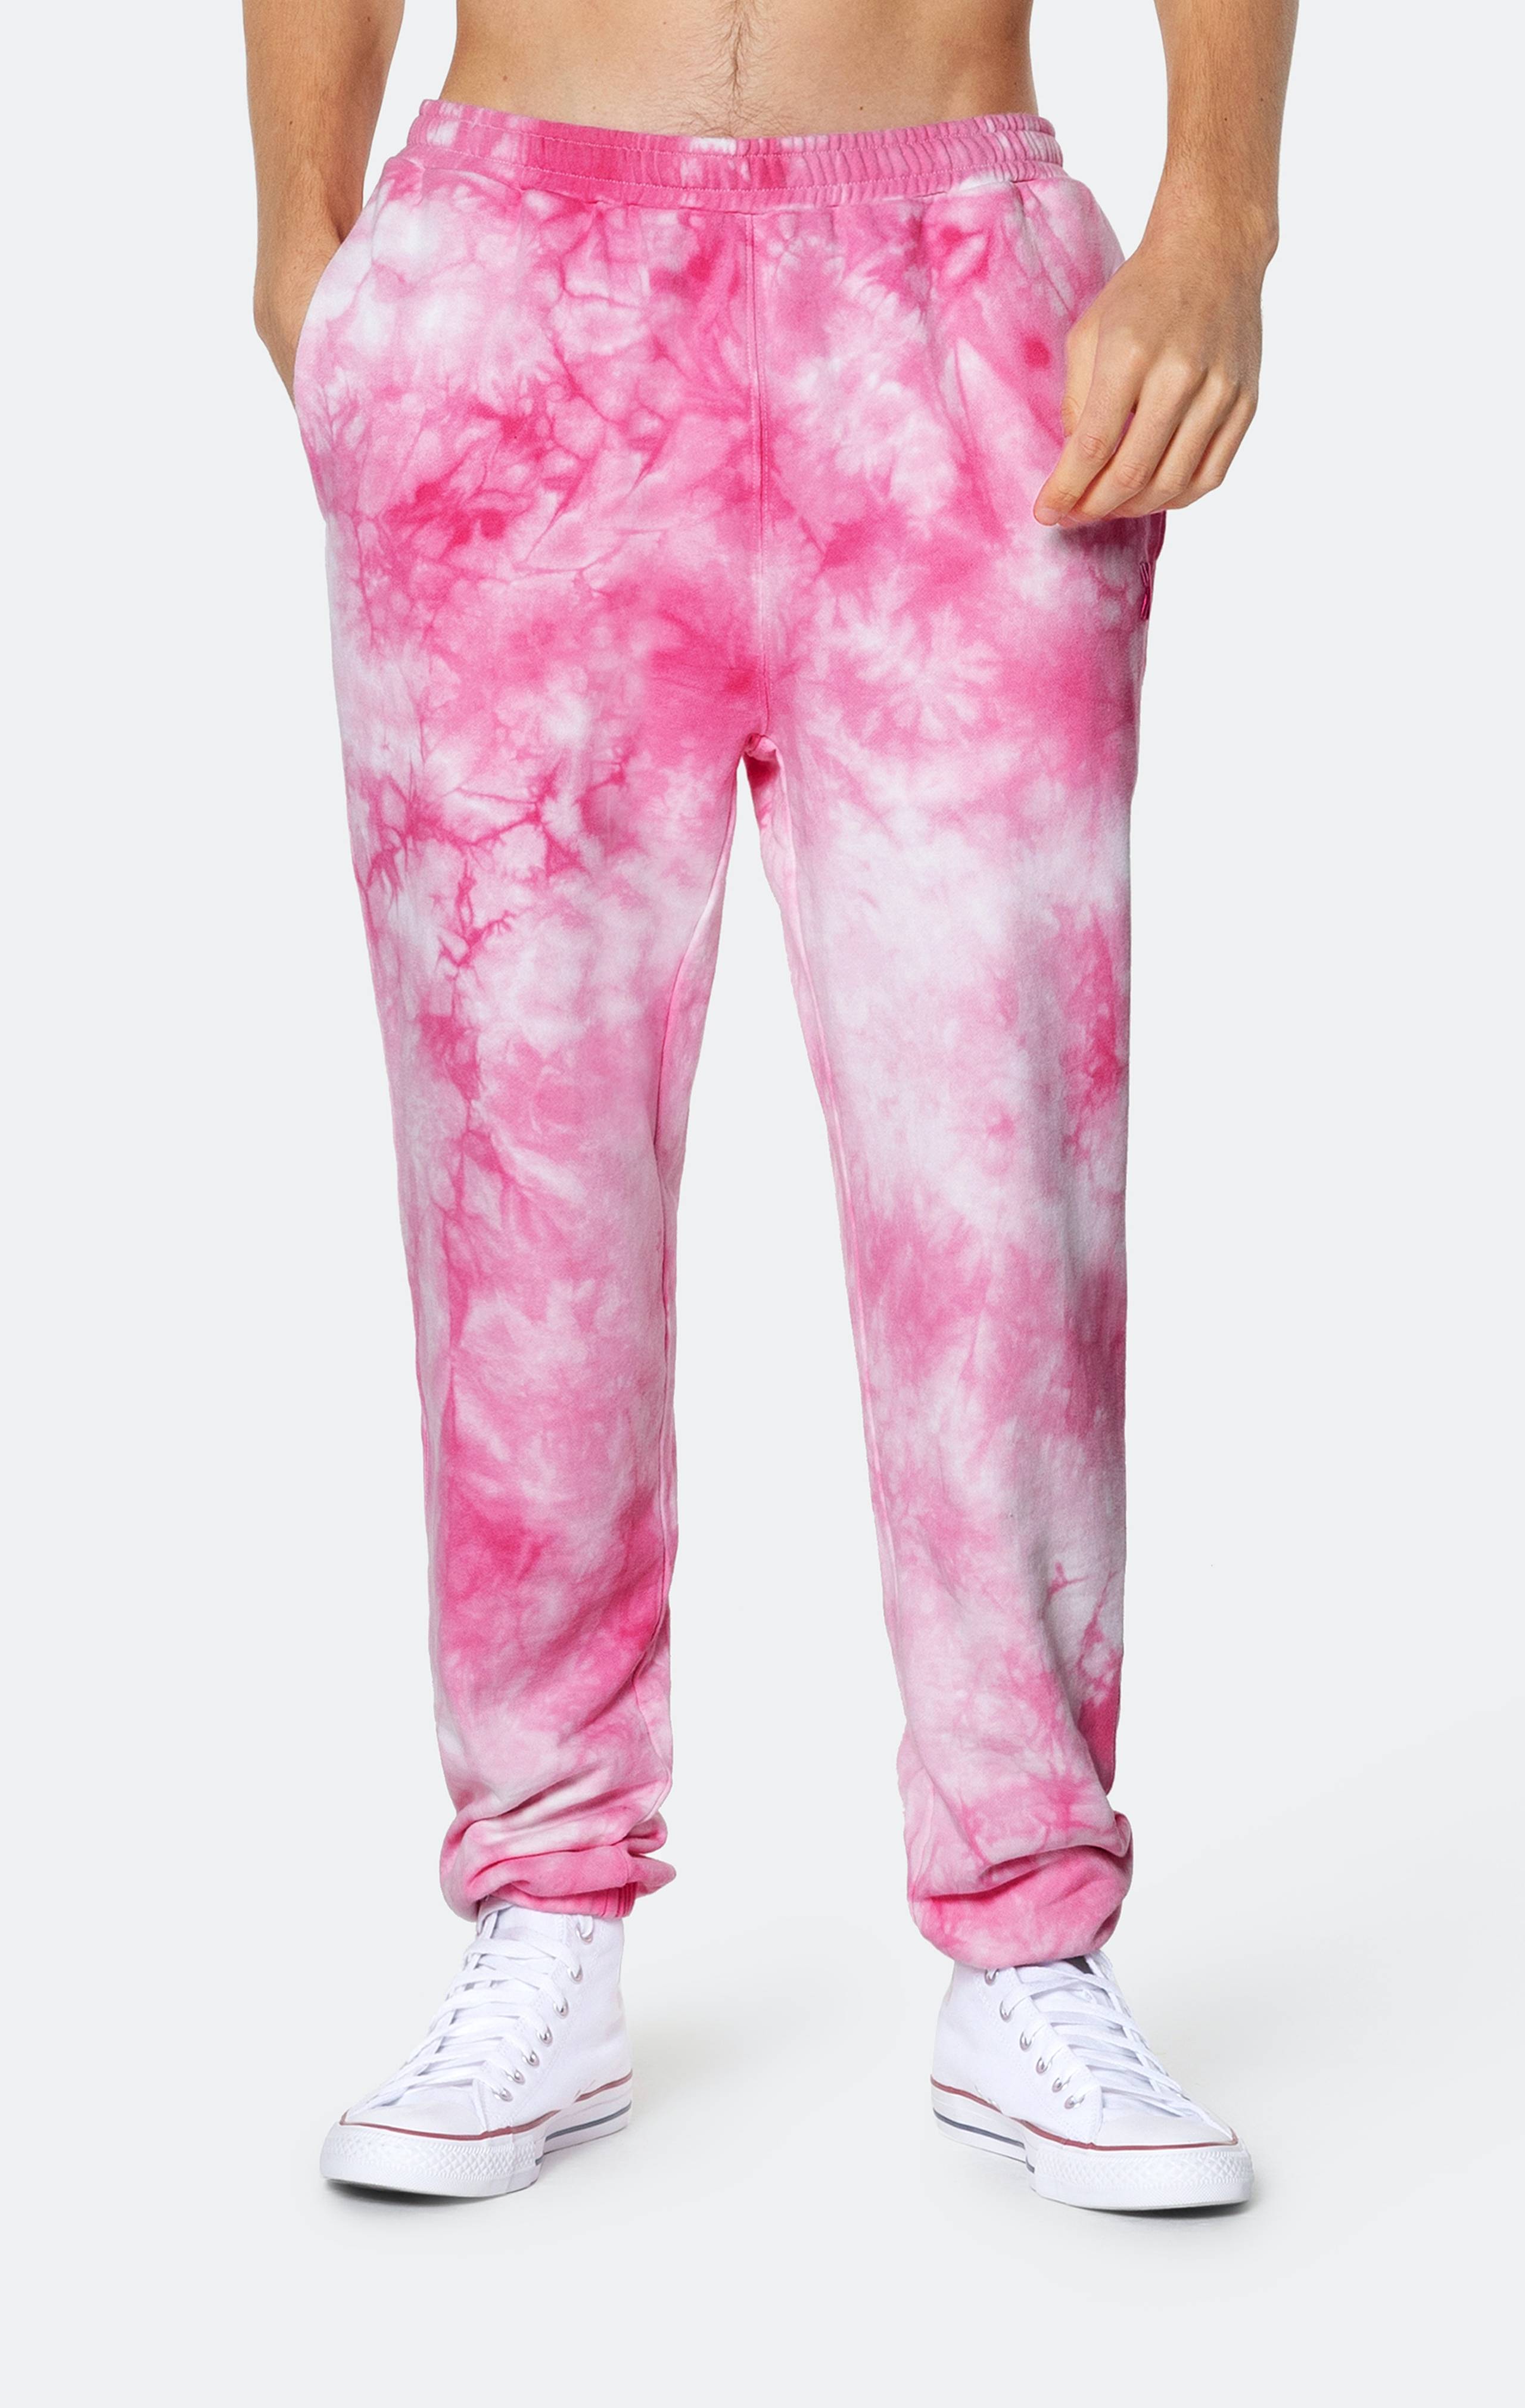 Onepiece Tie Dye Pant Pink - 3